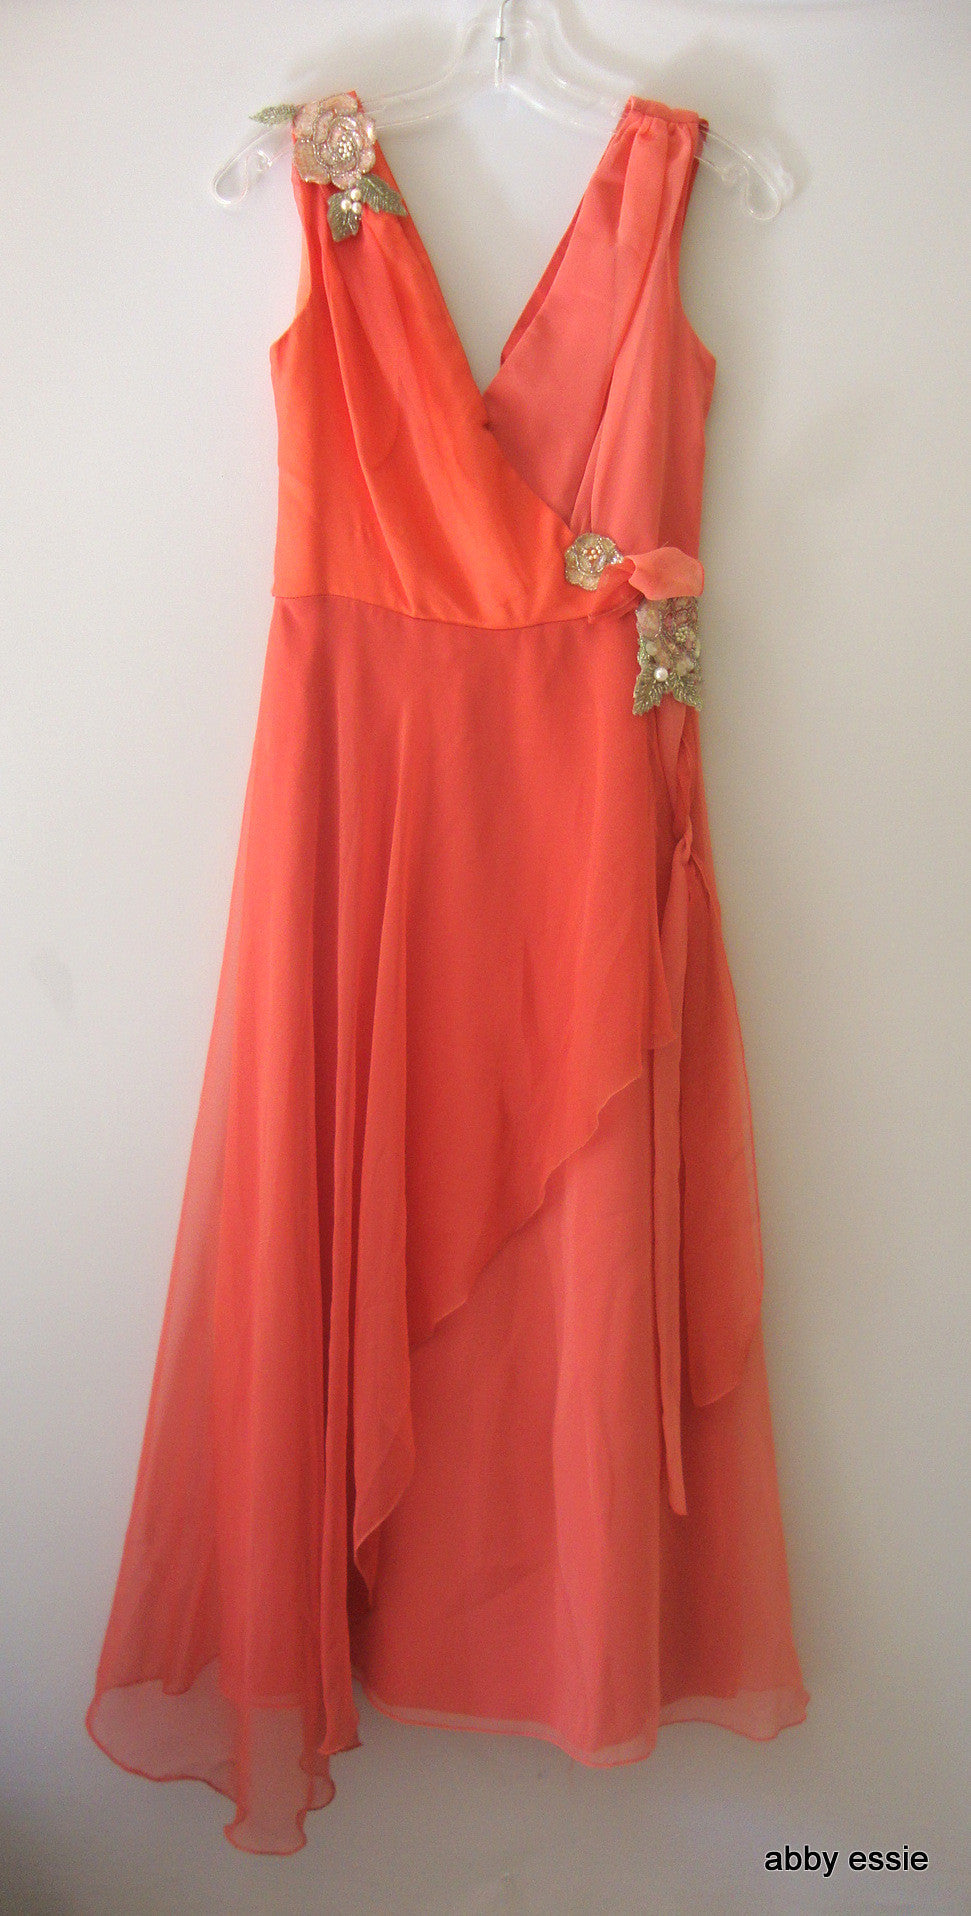 Vintage Bianchi Pink Peach Silver Sequin Grecian Layered Silky Dress Small 2 4 Ld-2708